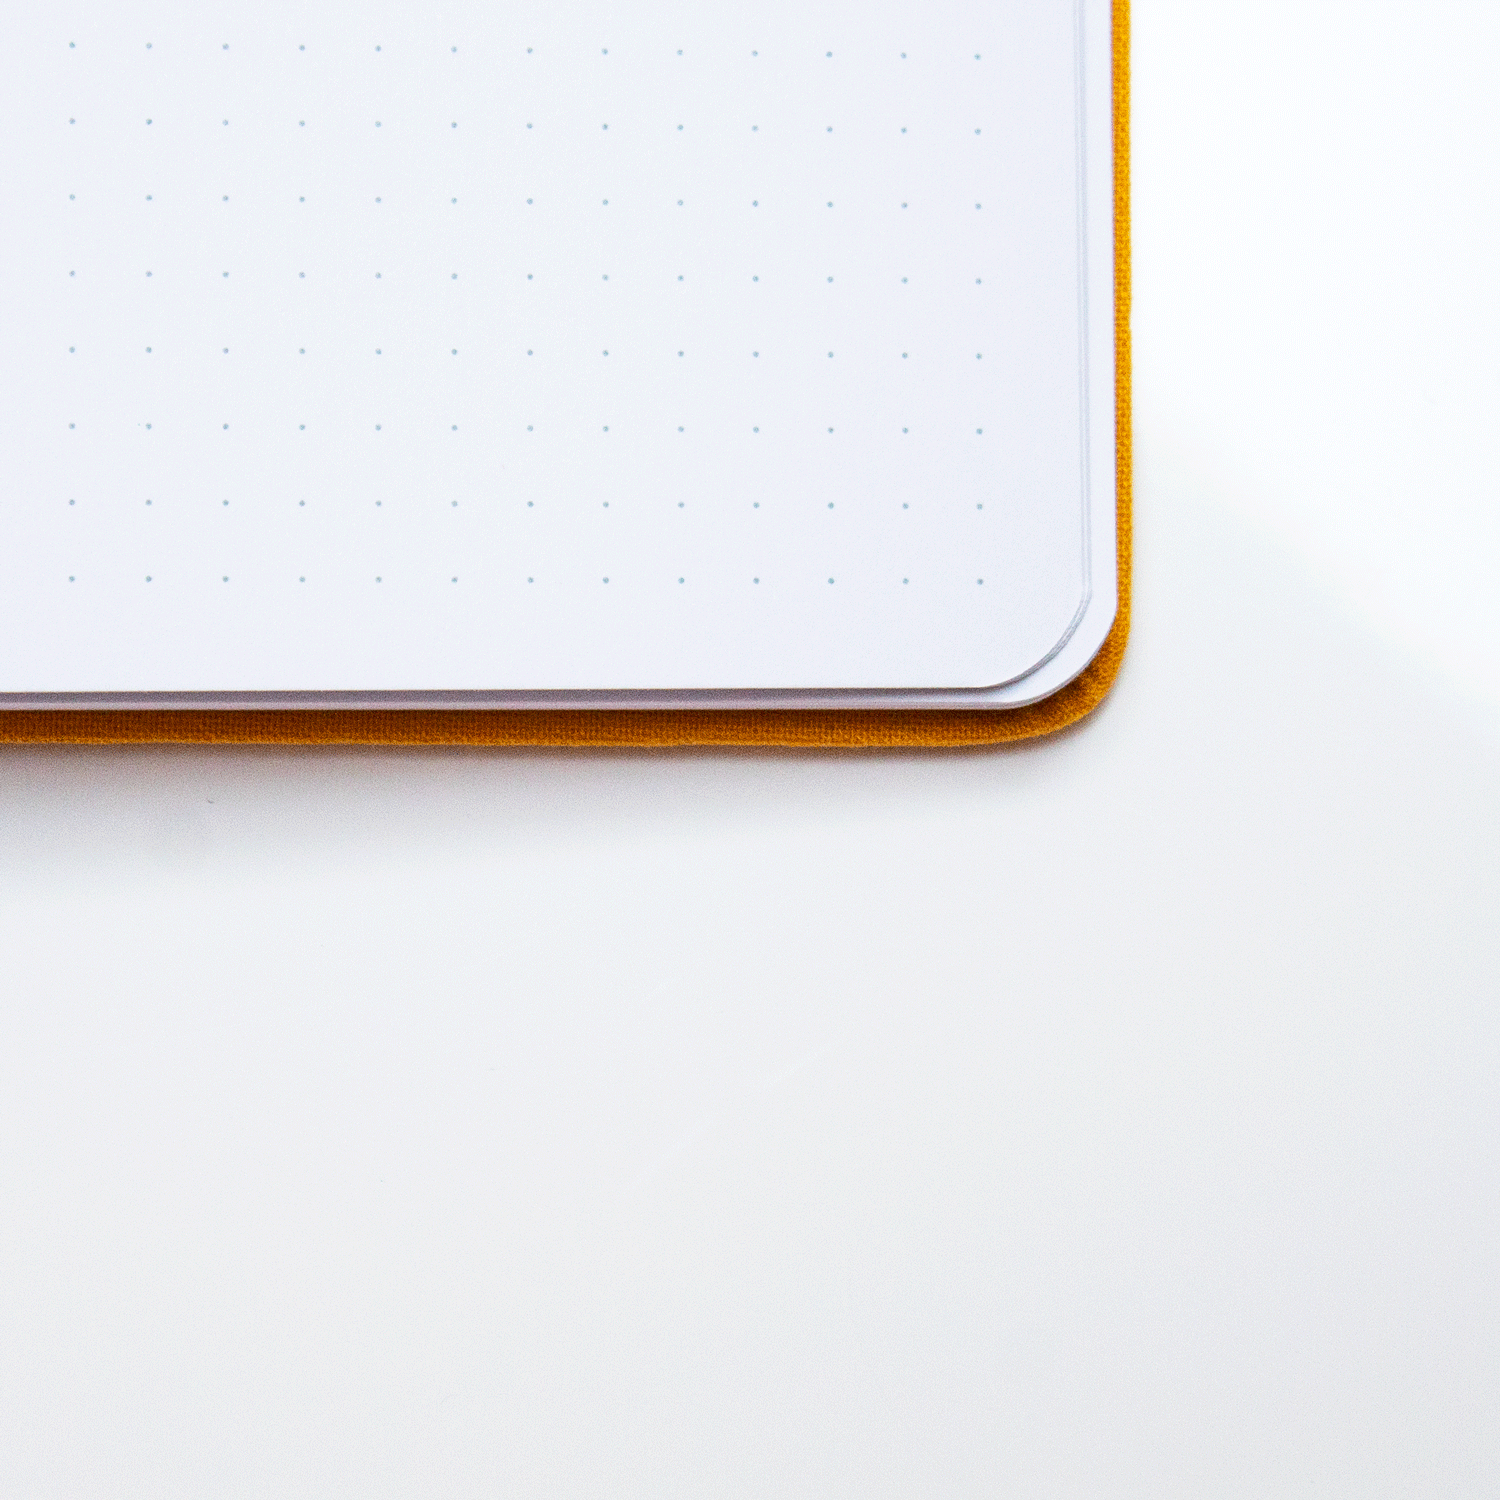 A close up of an opened Golden Dunes bobo BuJo dot grid journal showcasing the white dot grid pages.